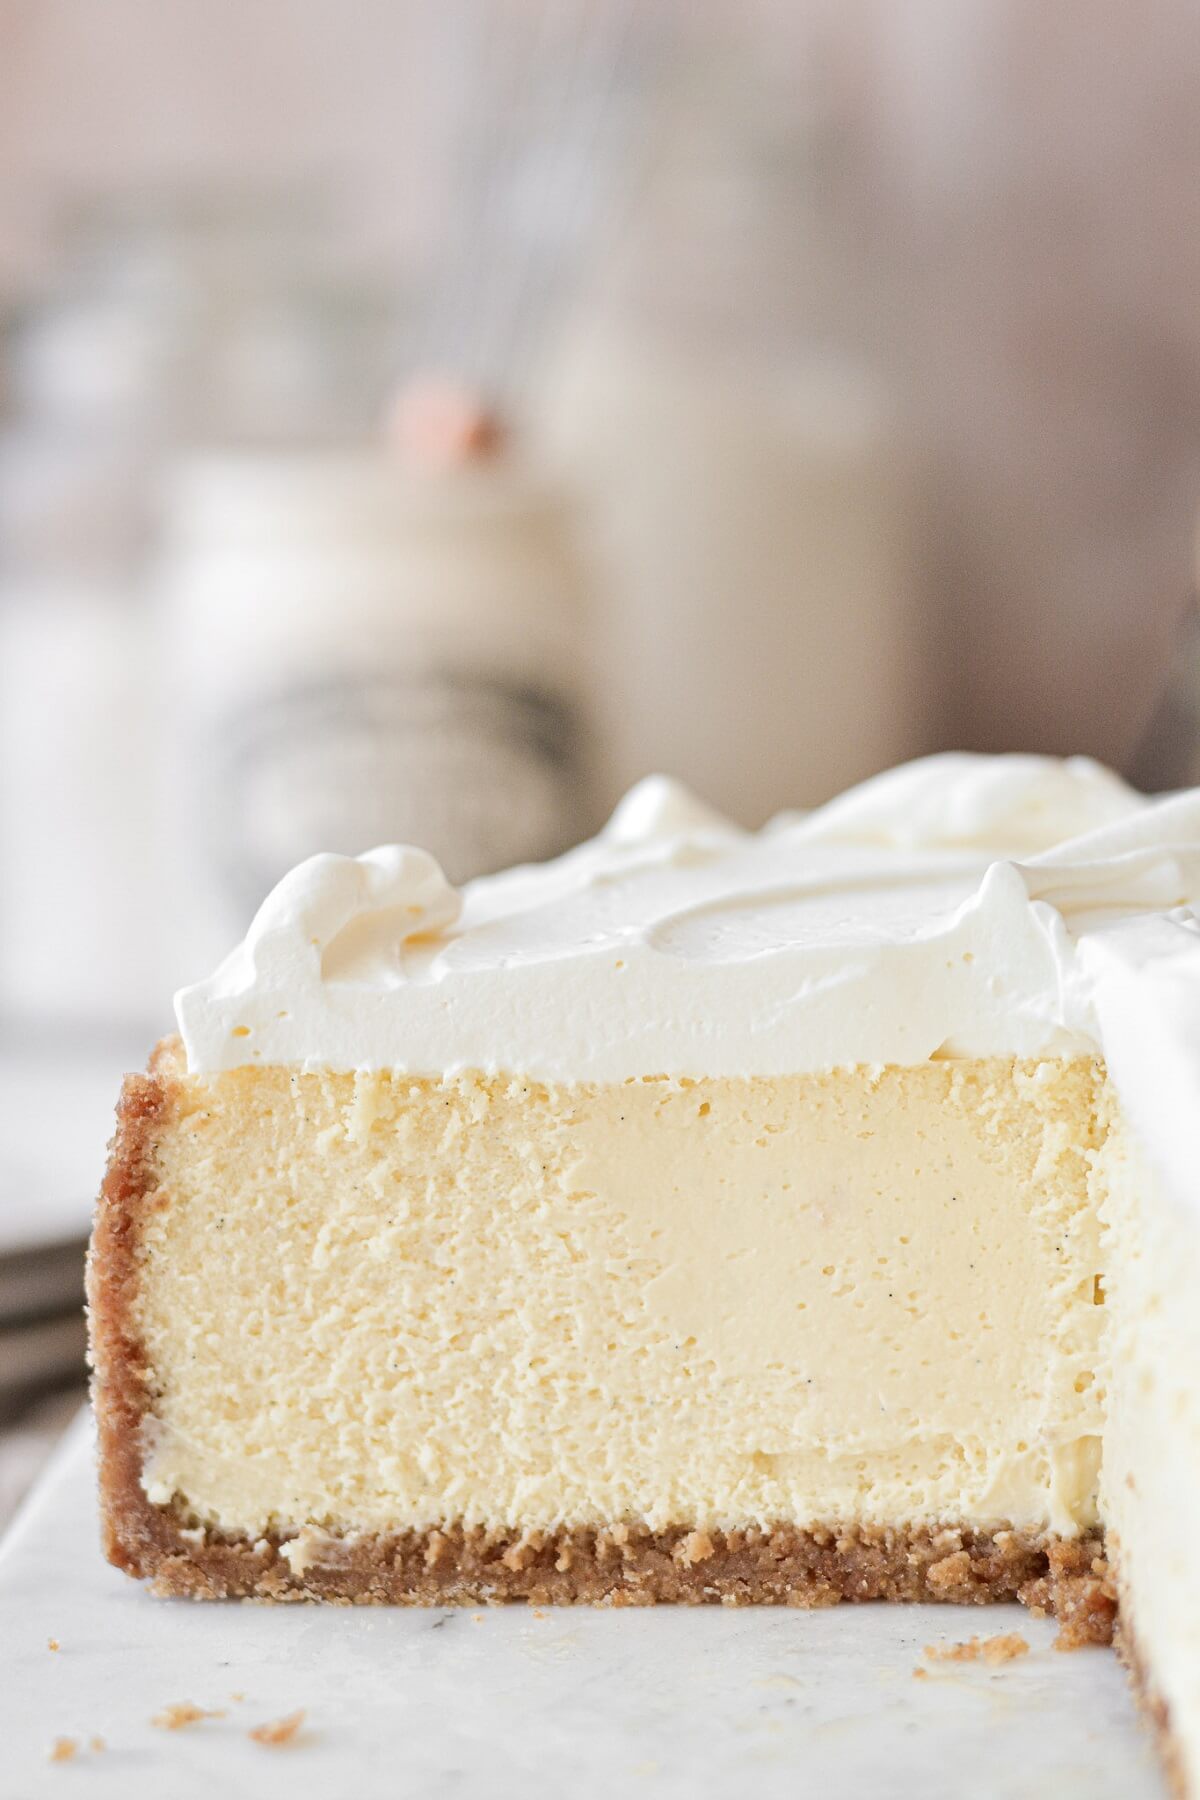 Creamy vanilla cheesecake topped with whipped cream.